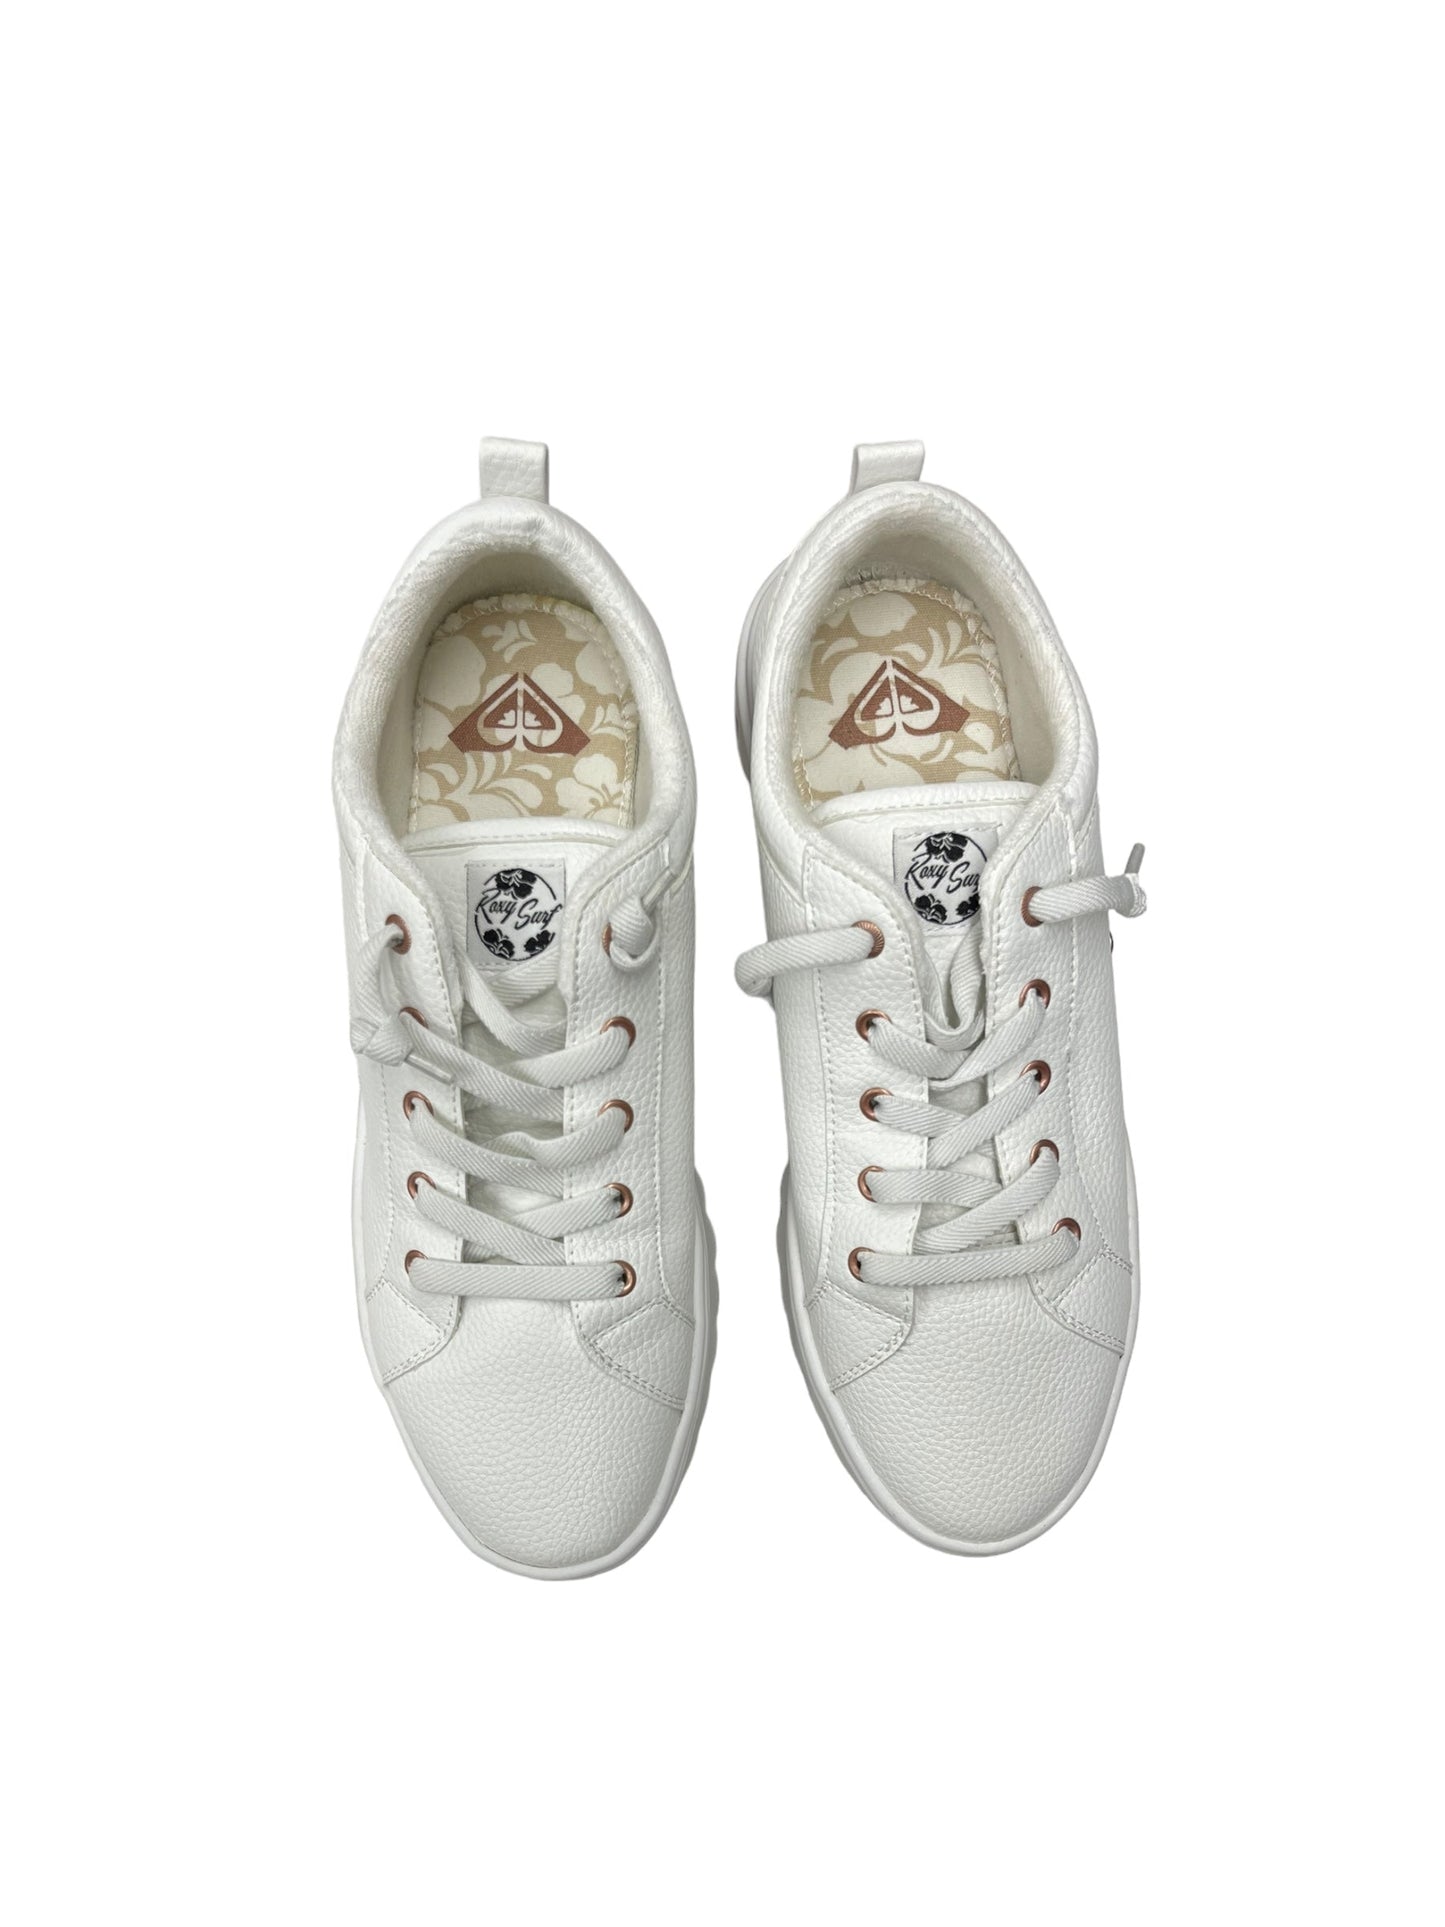 White Shoes Sneakers Roxy, Size 9